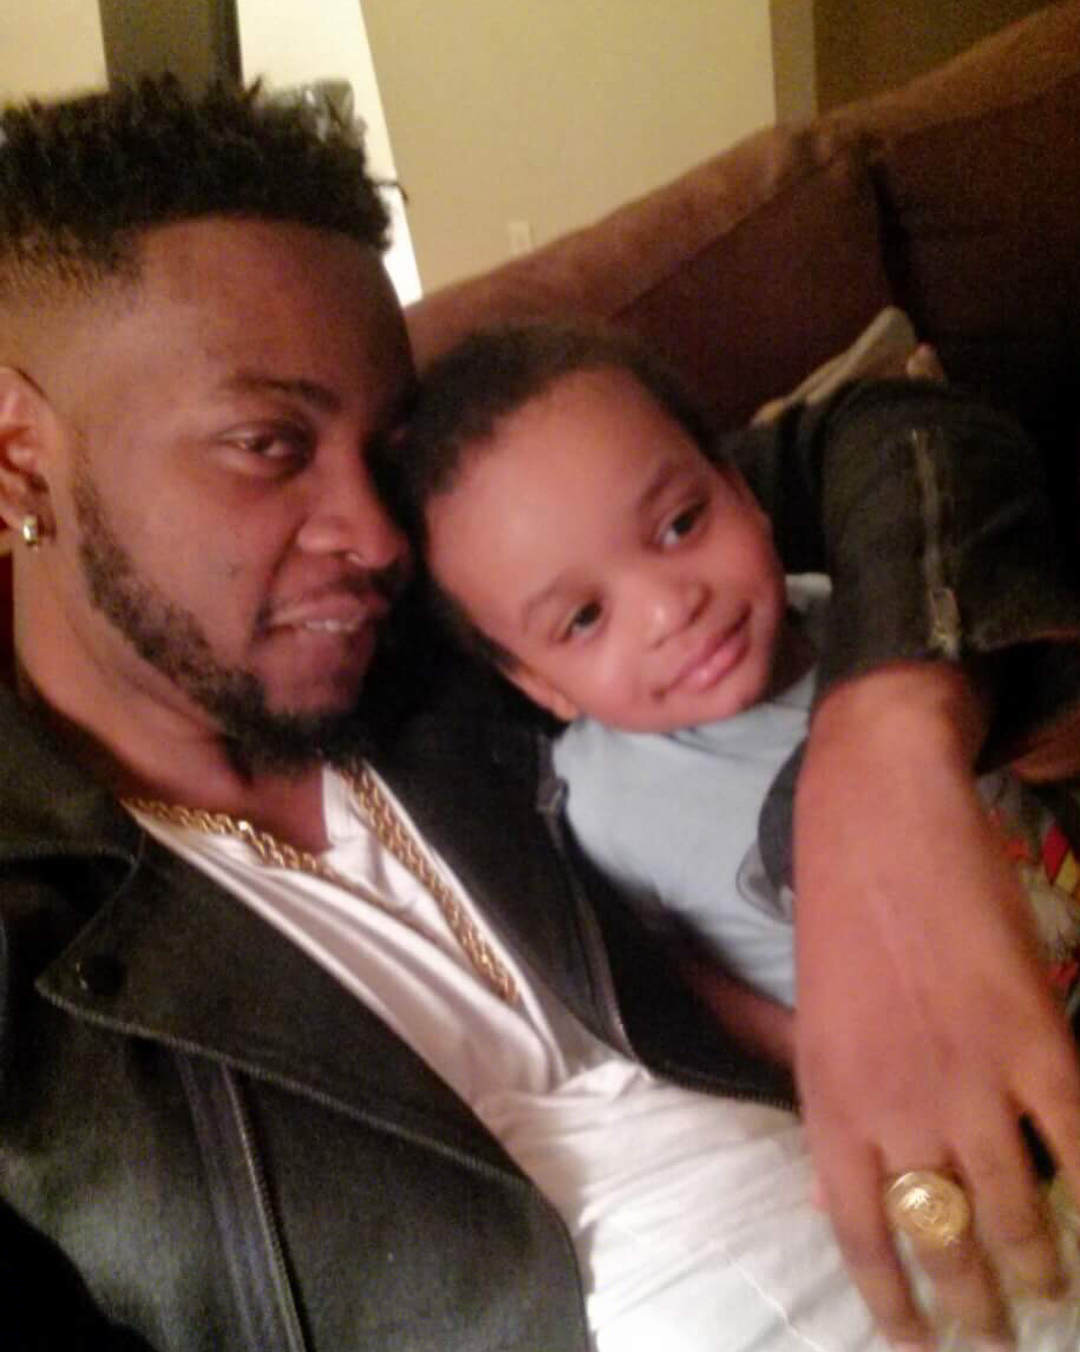 #BBNaija: Teddy A's baby mama showers him with praise; shares more photos with their son.